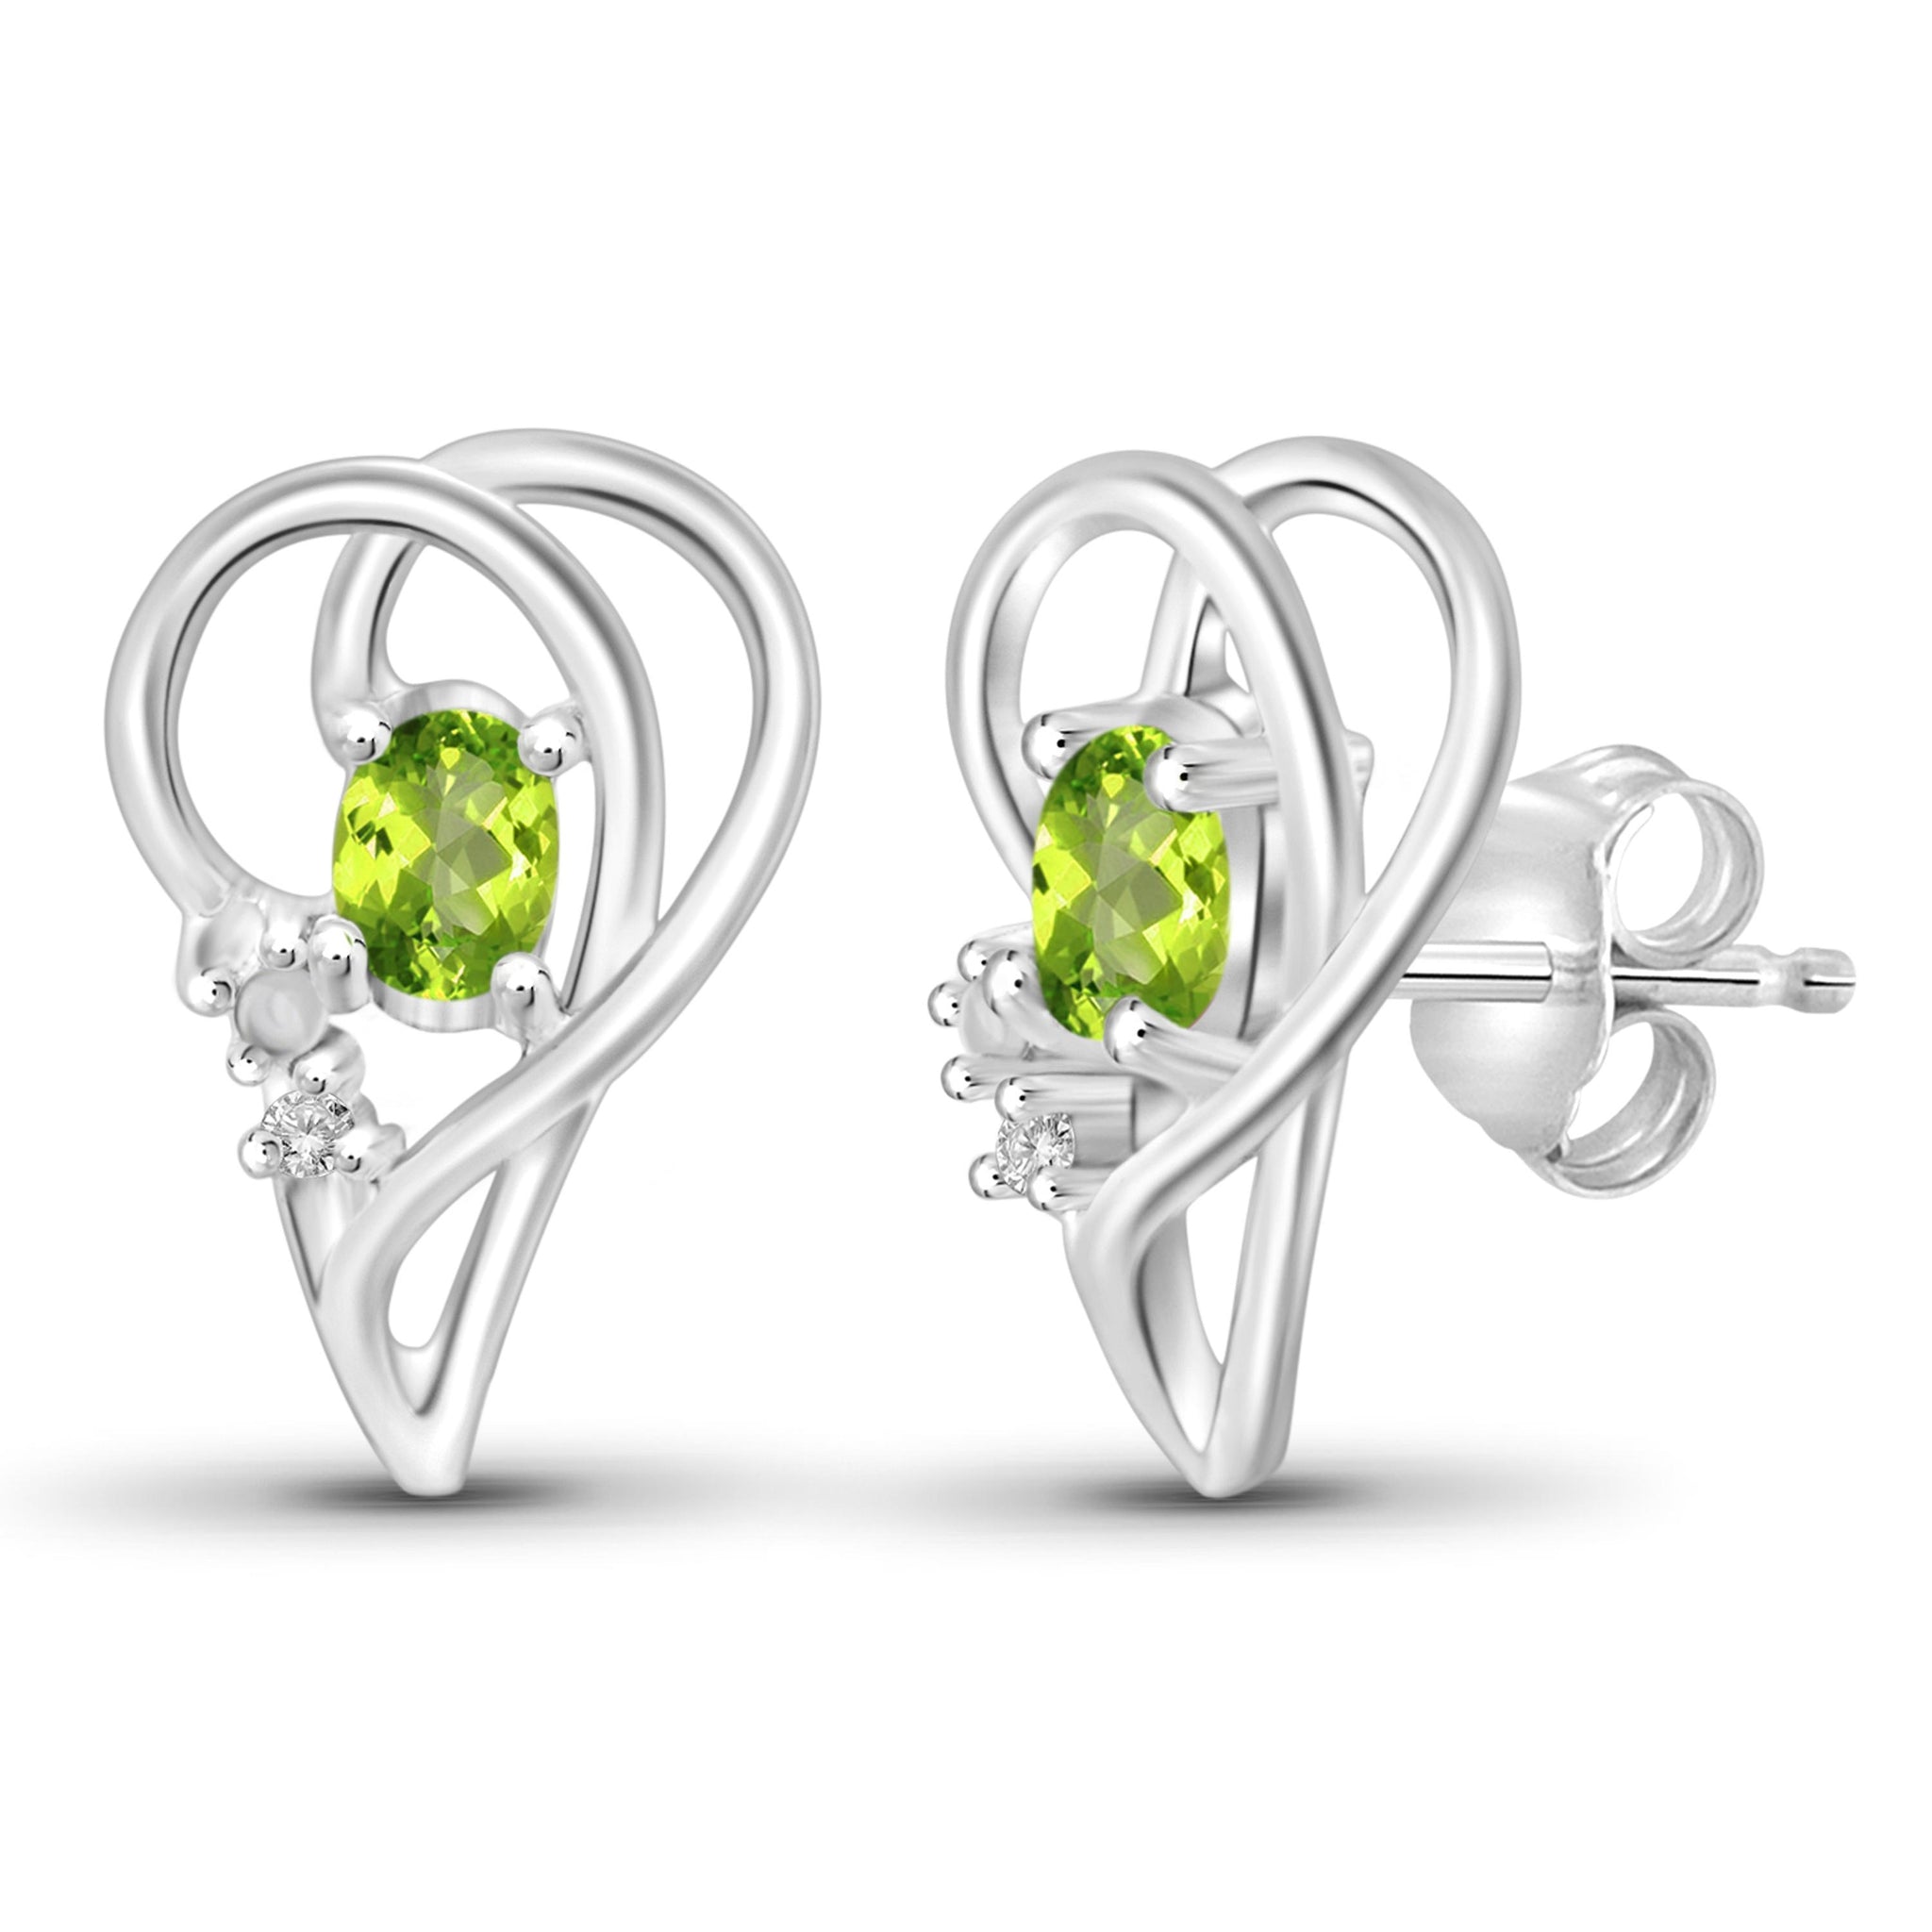 JewelonFire 1/2 Carat T.G.W. Peridot And White Diamond Accent Sterling Silver Stud Earrings - Assorted Colors